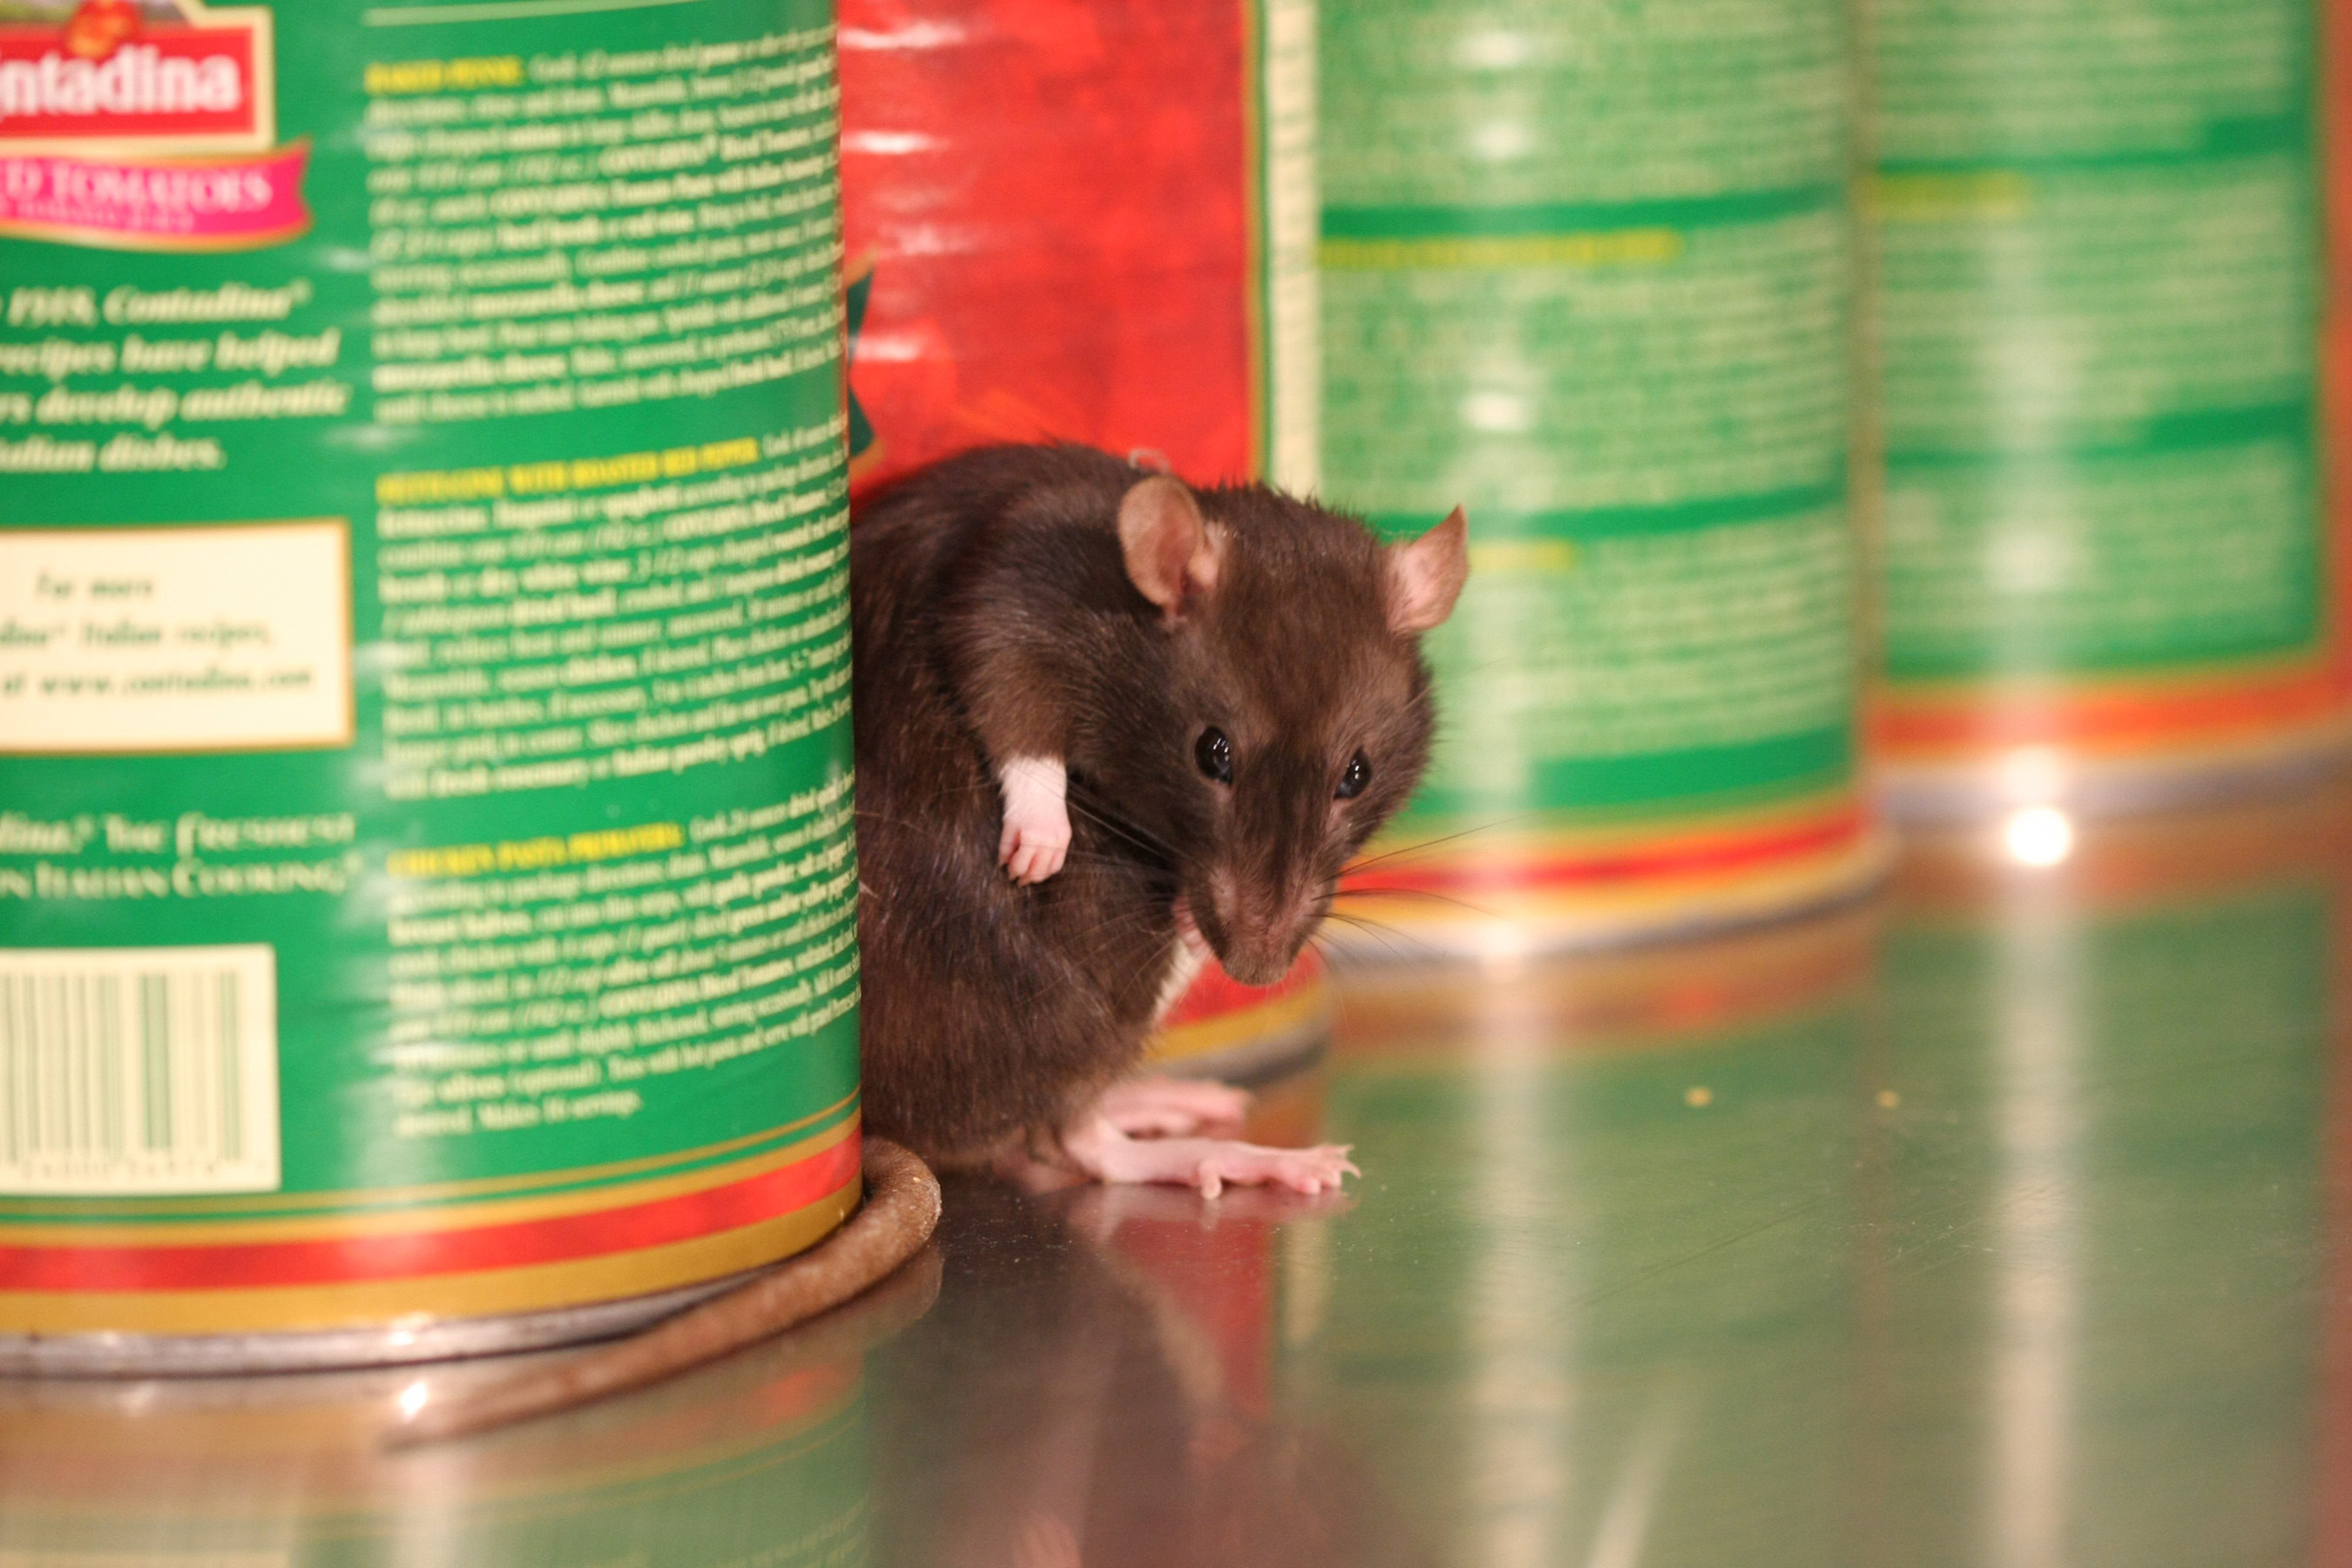 Pest control leader Orkin released its top 20 rattiest cities; Chicago holds no. 1 spot followed by Los Angeles, Washington, D.C., New York City and San Francisco. Orkin experts say while your city may not be ranked high on the list, you should not be any less vigilant. Rodents invade an estimated 21 million American homes each fall. (PRNewsFoto/Orkin, LLC)